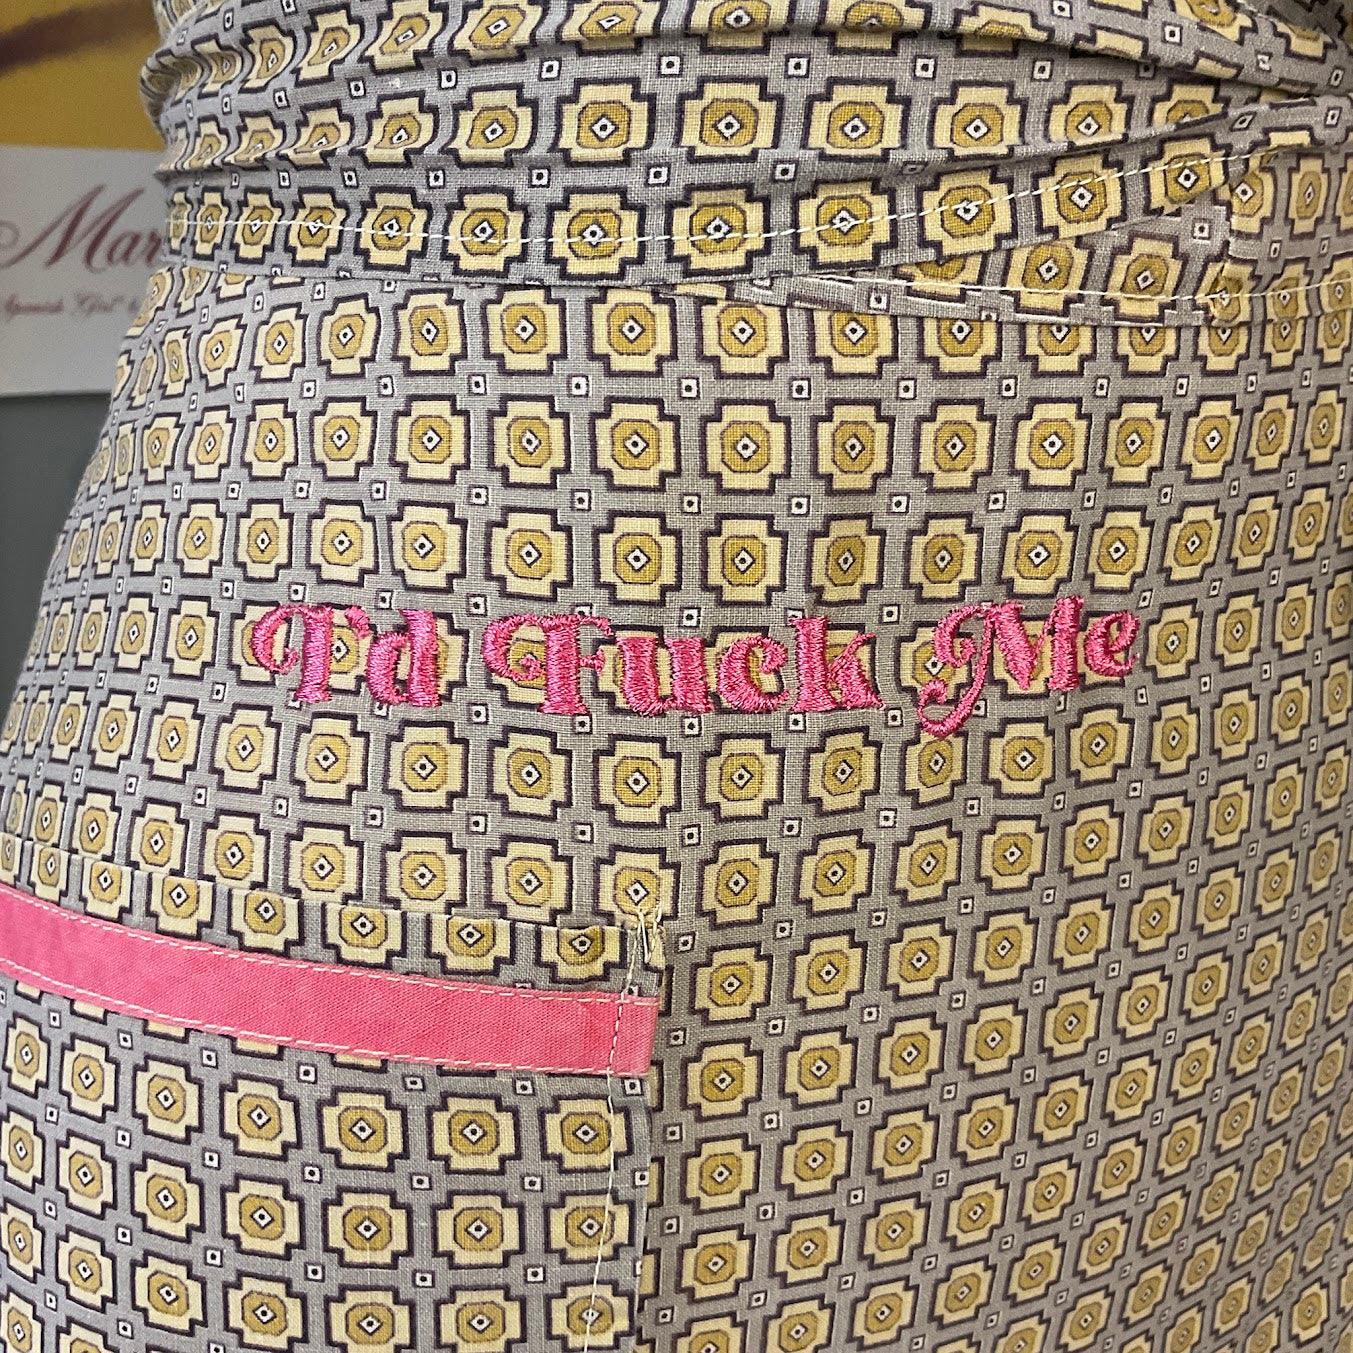 I'd Fuck Me Apron - Offensively Domestic